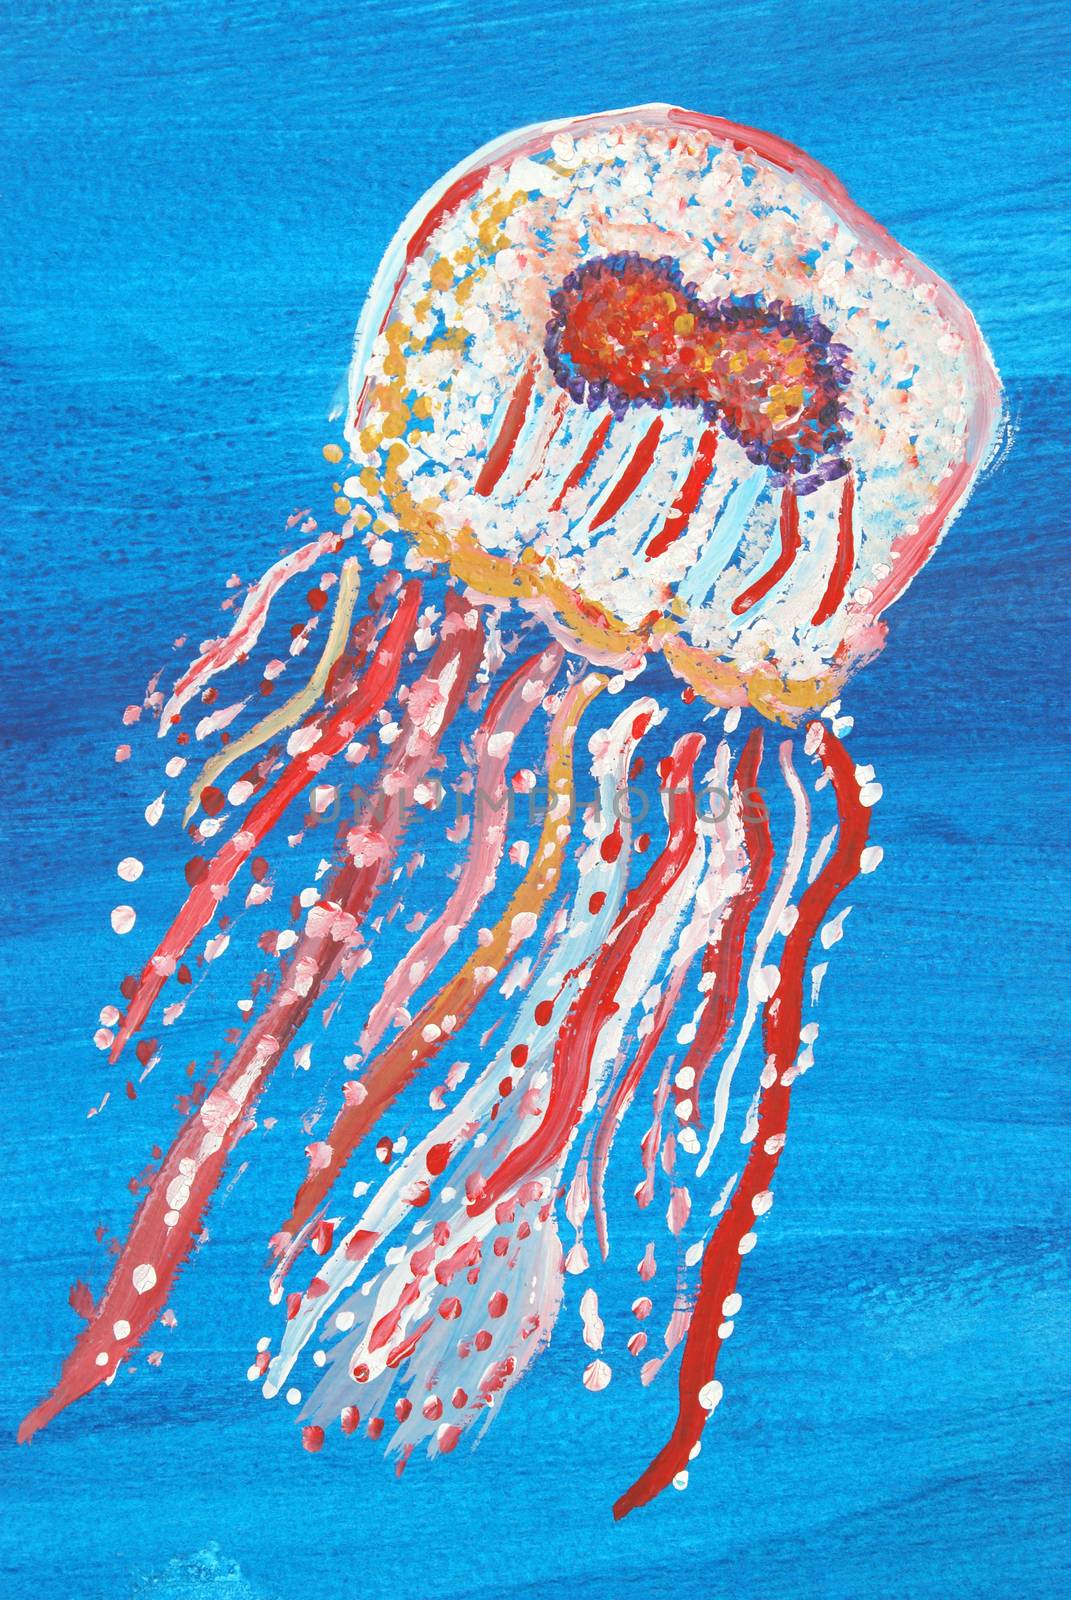 A vibrant painting of a jellyfish swimming under water.